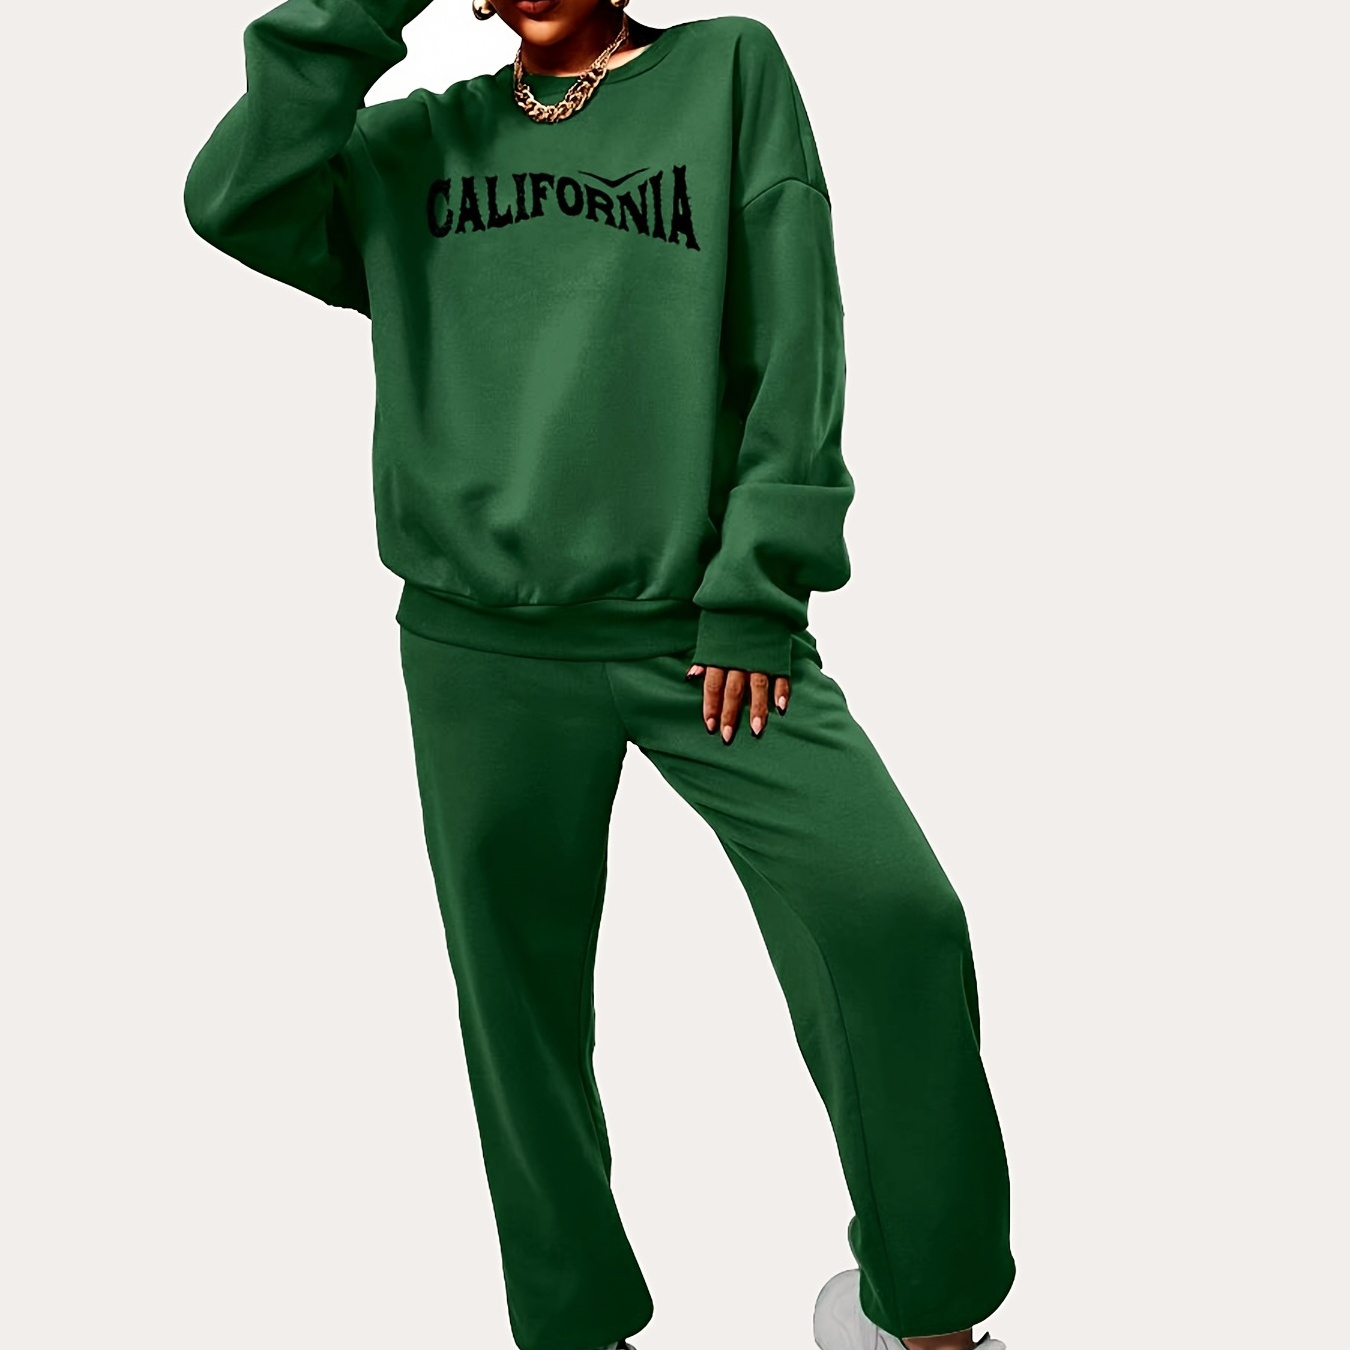 Letter Graphic Recycled Polyester Blends Sweatpants Pullover, Women's ...